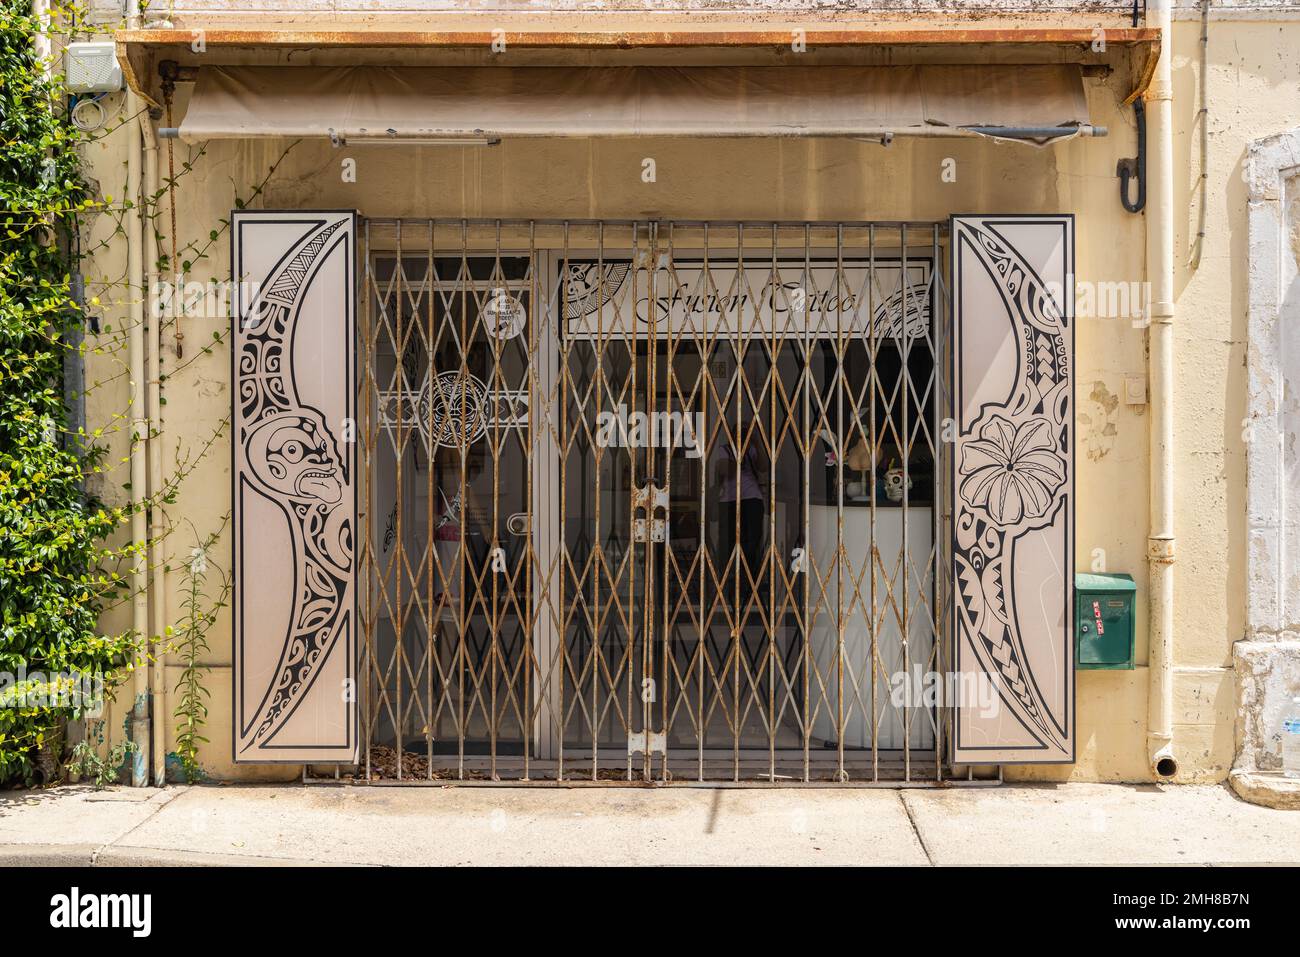 Aigues-Mortes, Gard, Occitania, France. July 4, 2022. Locked and gated small store in southern France. Stock Photo